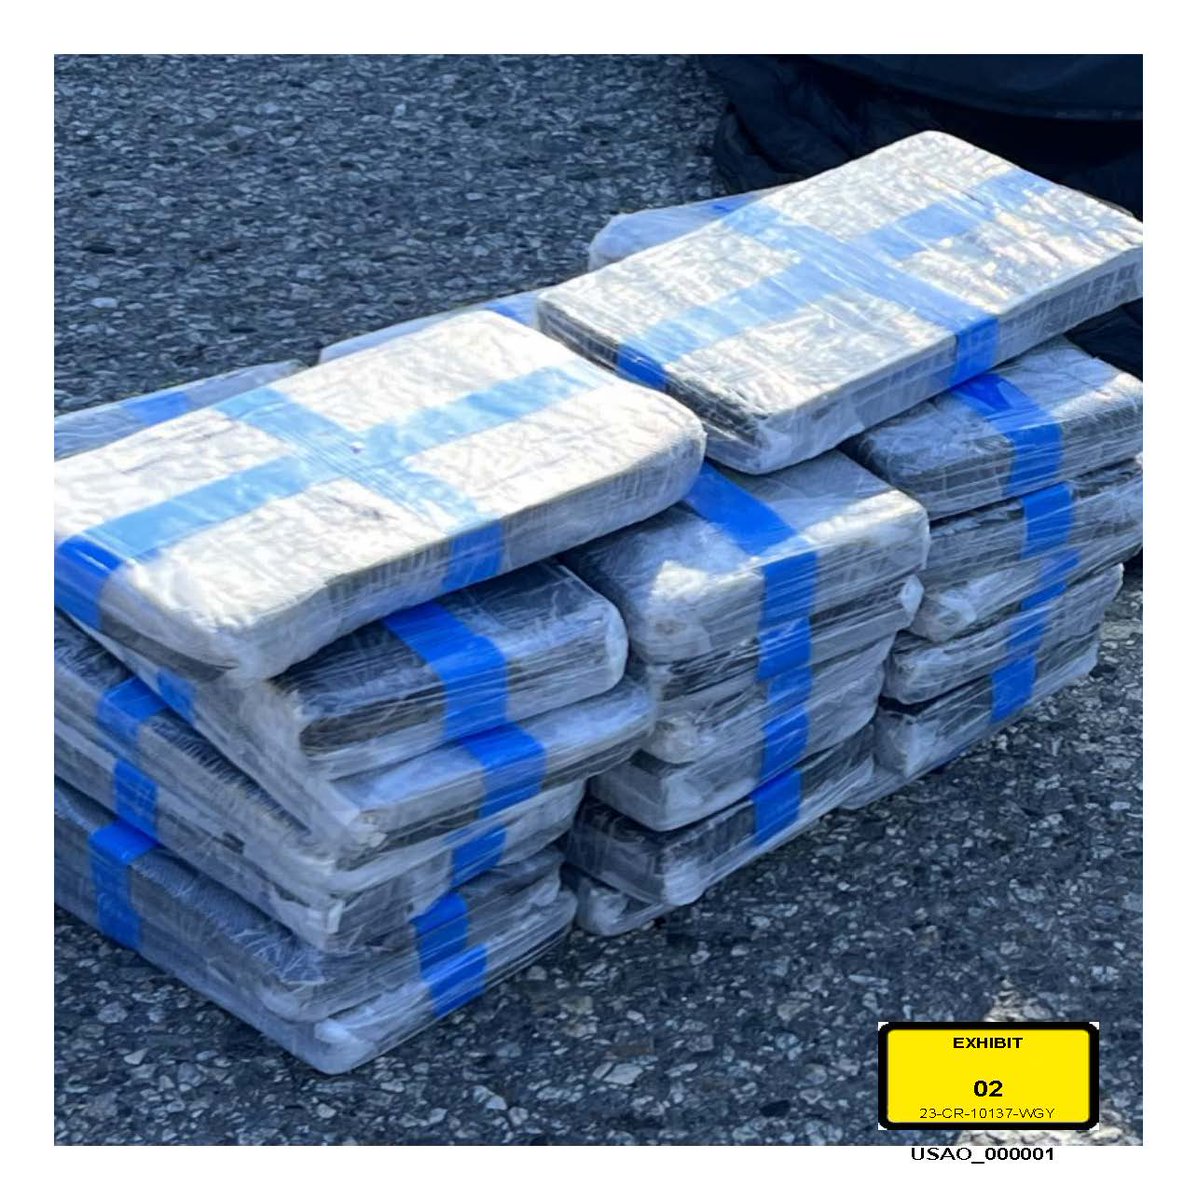 Mexican man convicted of transporting 20 kilos of cocaine into Mass. for Mexican drug cartel. Defendant drove more than 30 hours from Texas with cocaine hidden in duffle bag. 
🔗justice.gov/usao-ma/pr/mex…